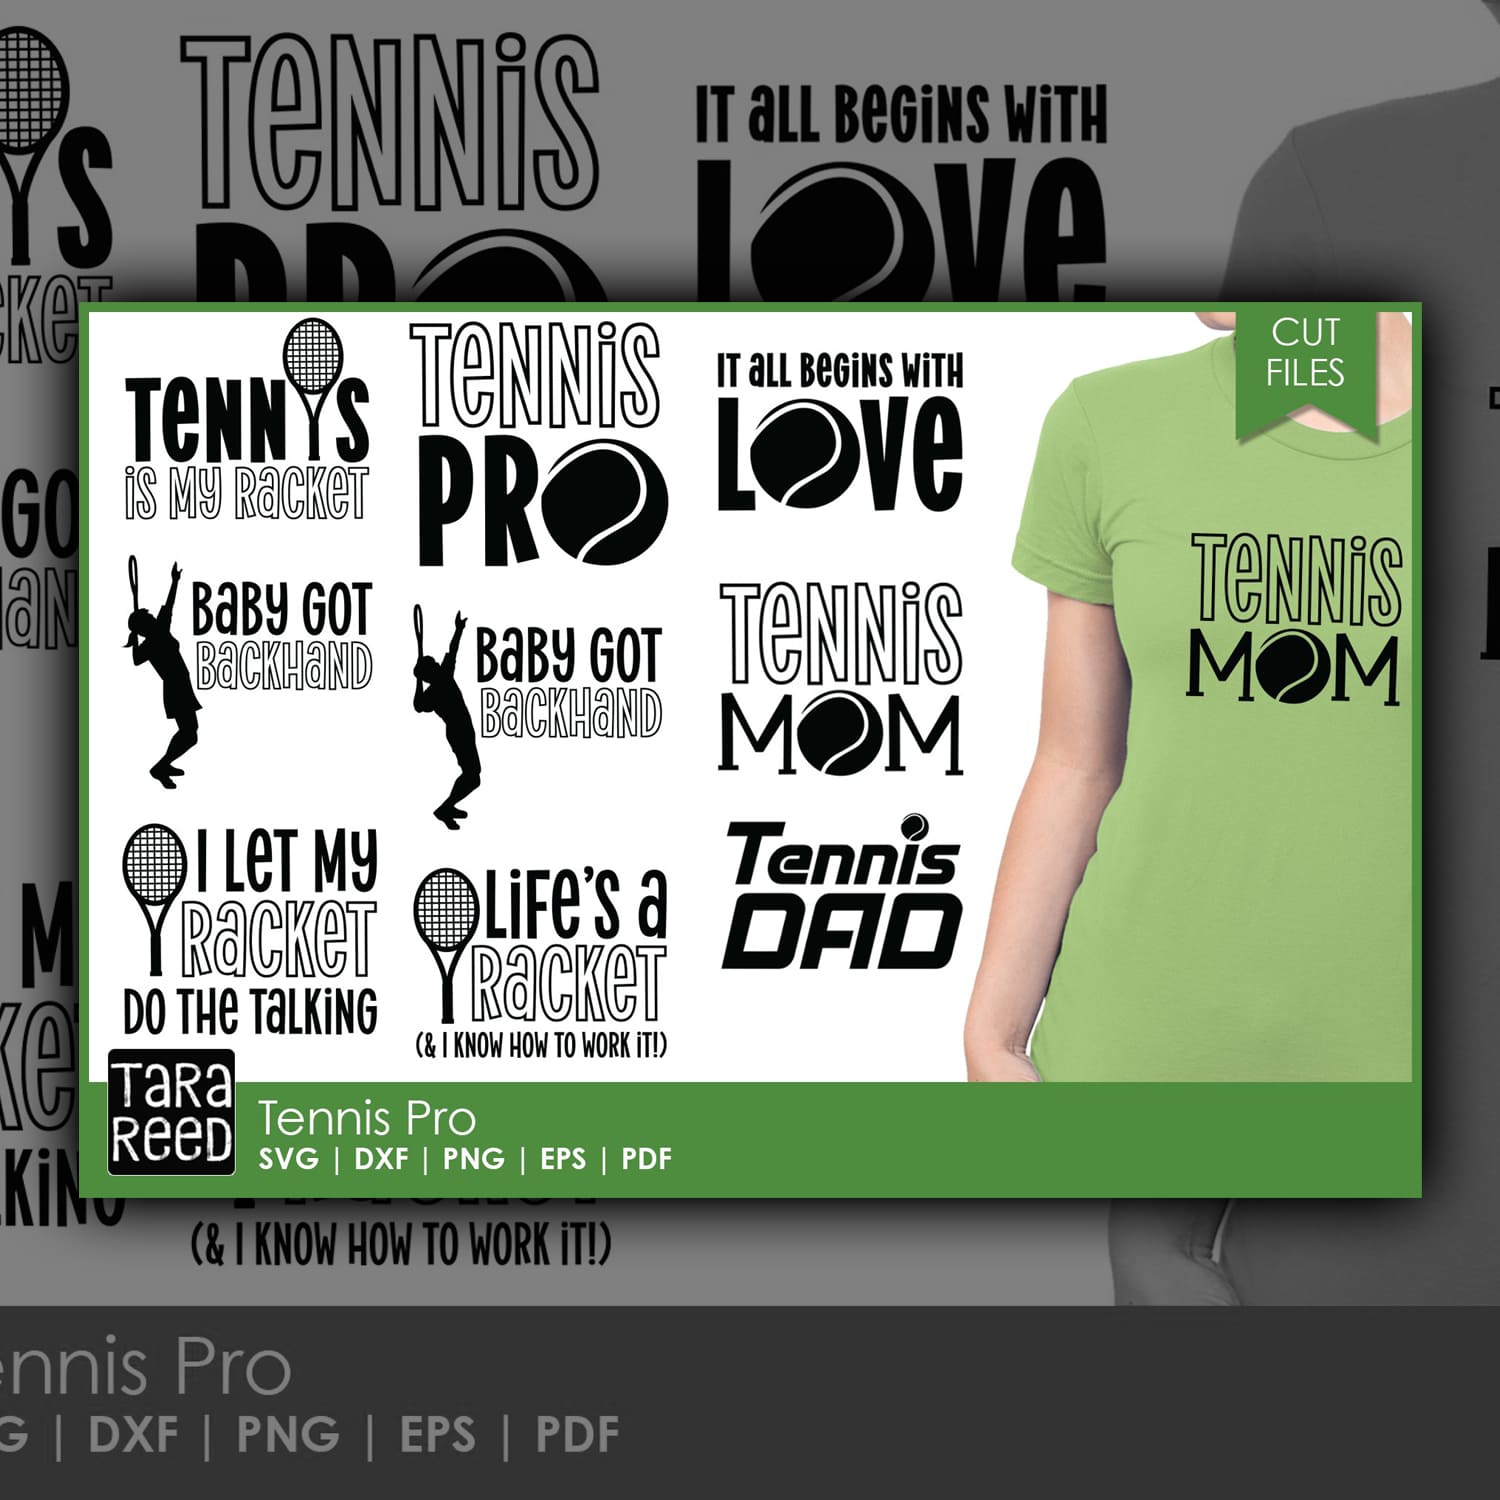 Tennis Pro - Tennis SVG and Cut Files for Crafters.